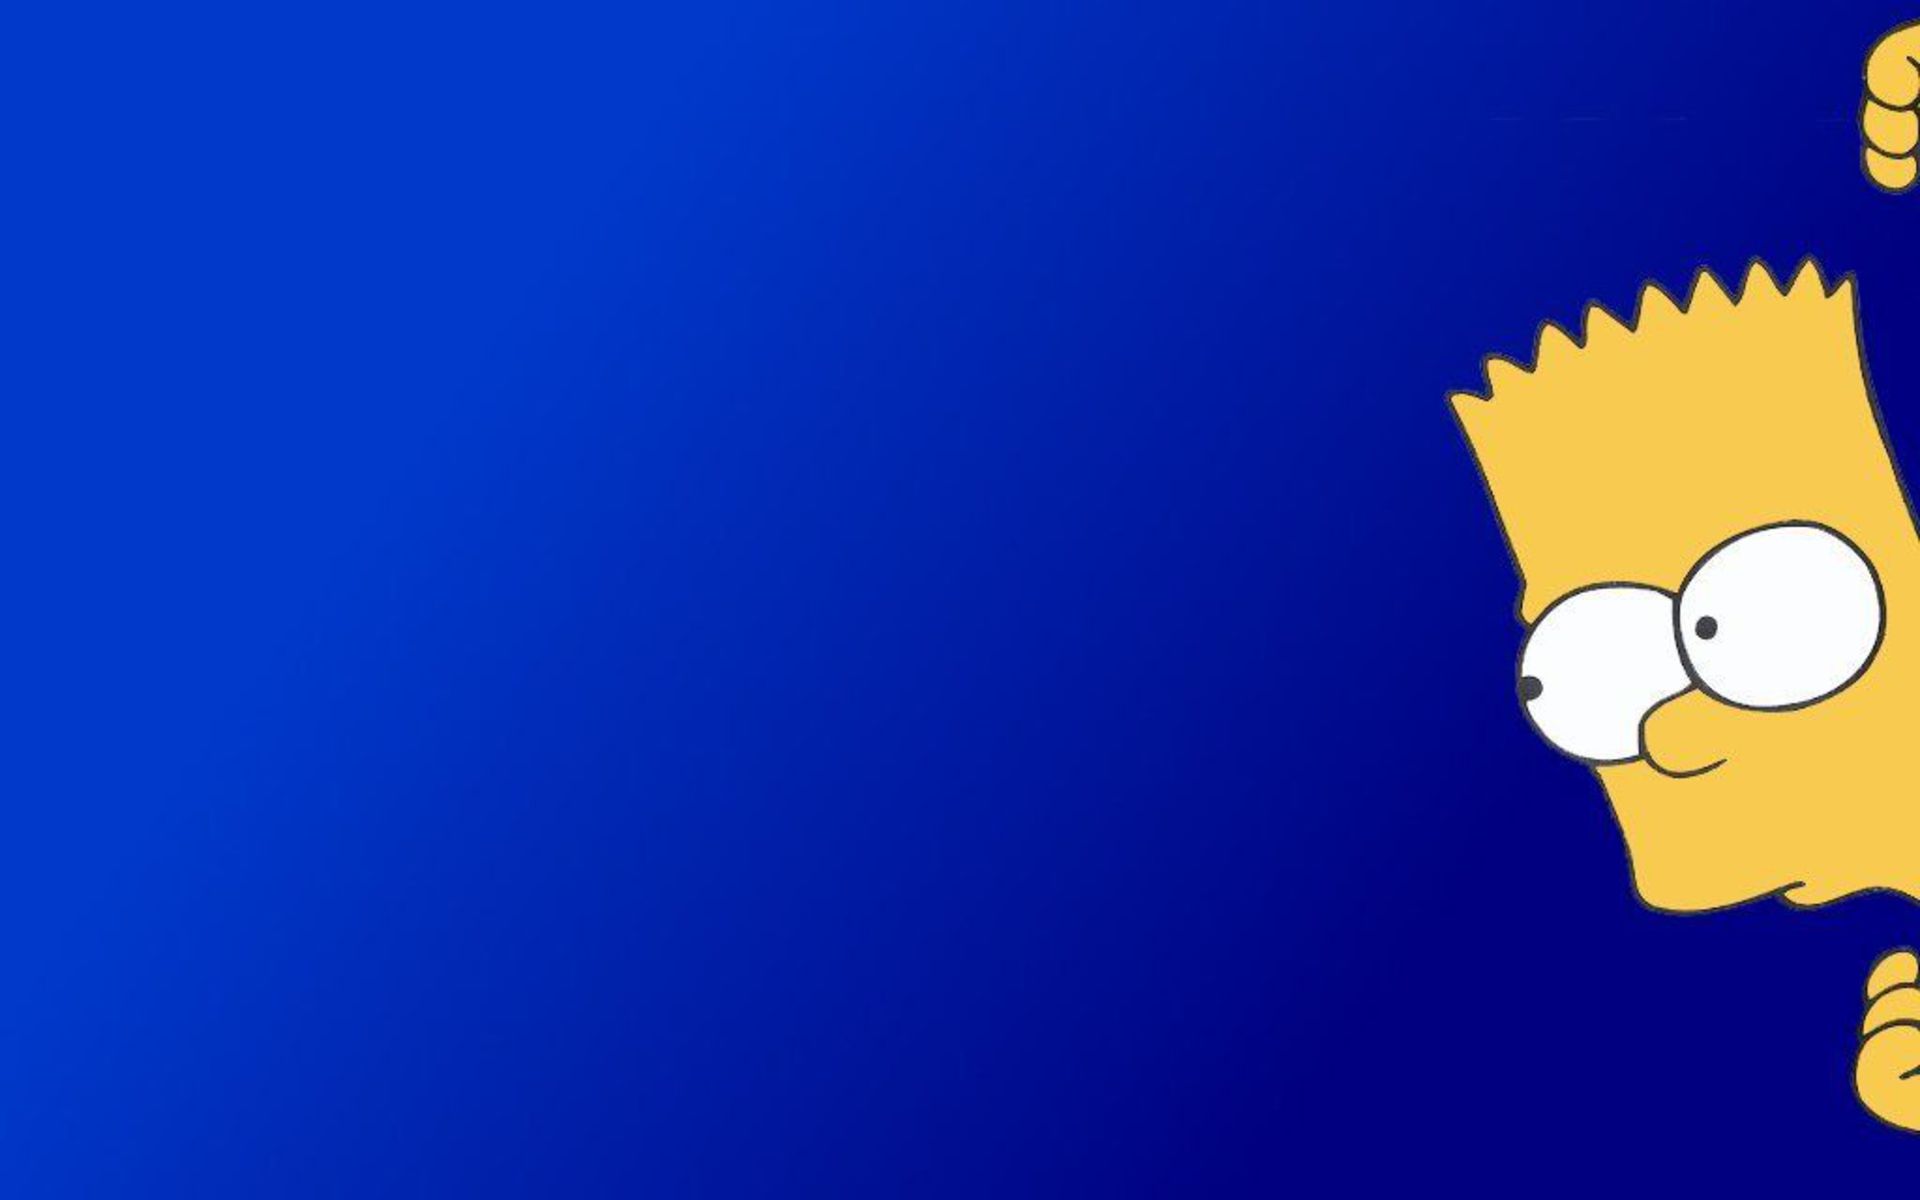 Simpsons wallpapers Free Full HD Wallpaper. Widescreen HQ